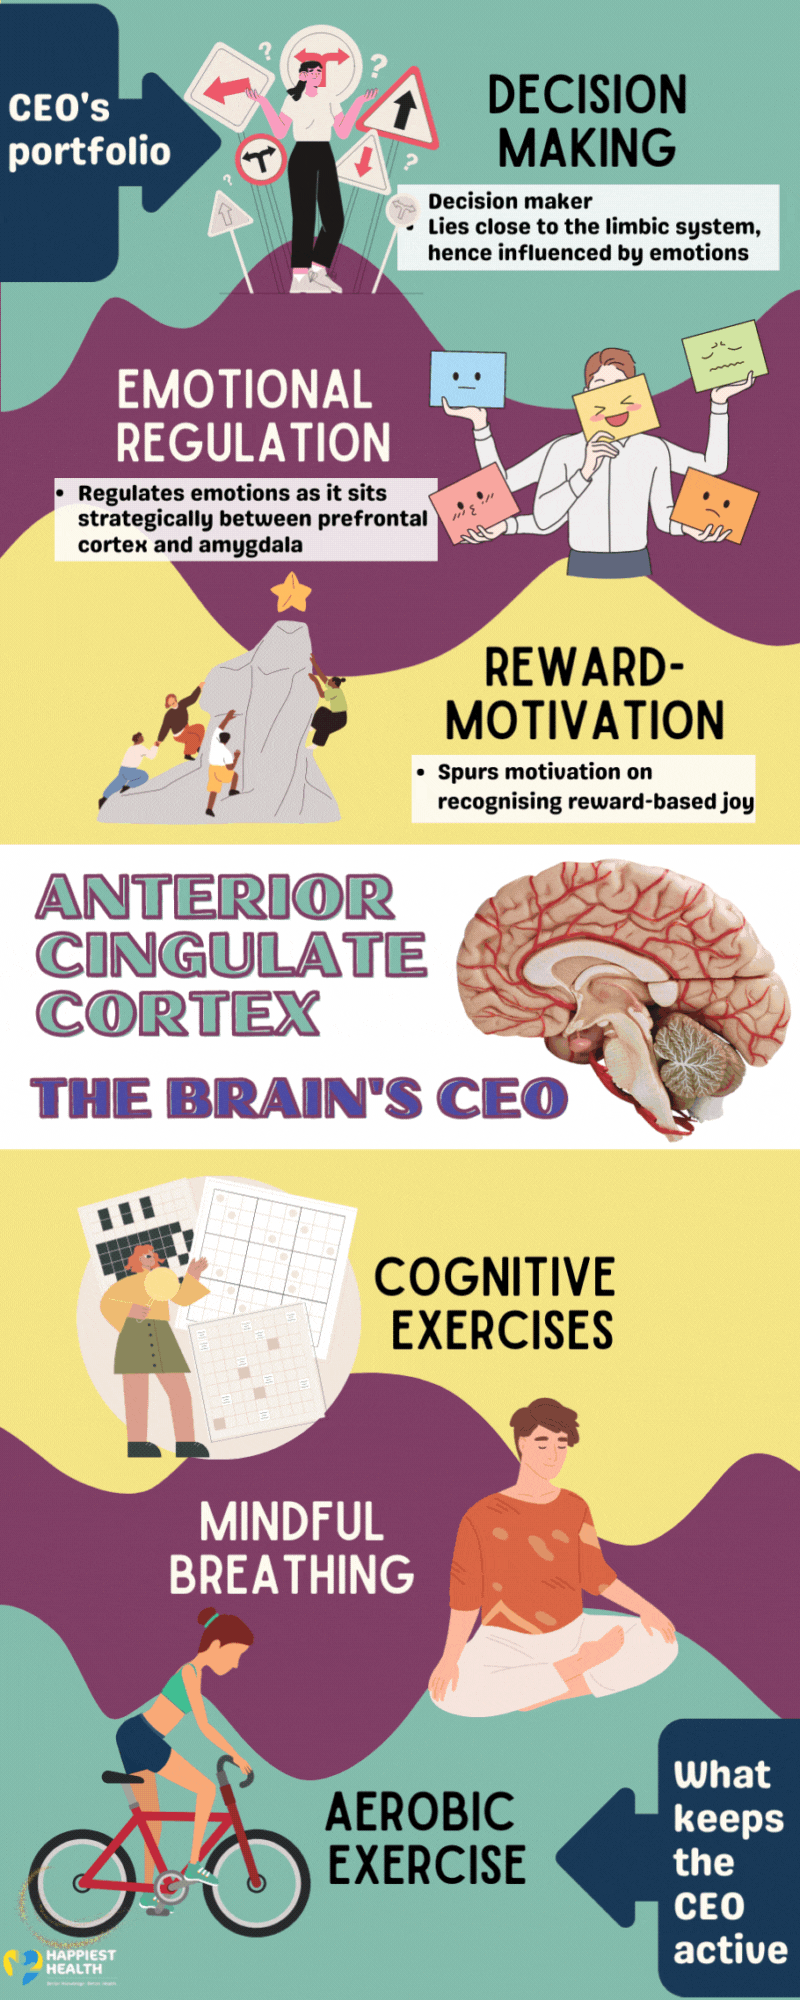 Anterior Cingulate Cortex - The brain's CEO The CEO's portfolio- Image of a confused girl on decisions Decision making- Decision maker Lies close to the limbic system, hence influenced by emotions a man holding many faces- Emotional regulation- Regulates emotions as it sits strategically between prefrontal cortex and amygdala People climbing a hill towards a reward star Reward Motivation- Spurs motivation on recognising reward-based joy What Keeps the CEO active Cognitive exercises- a girl solving sudoku and crossword puzzles Mindful breathing- A man meditating A girl cycling- aerobic exercise